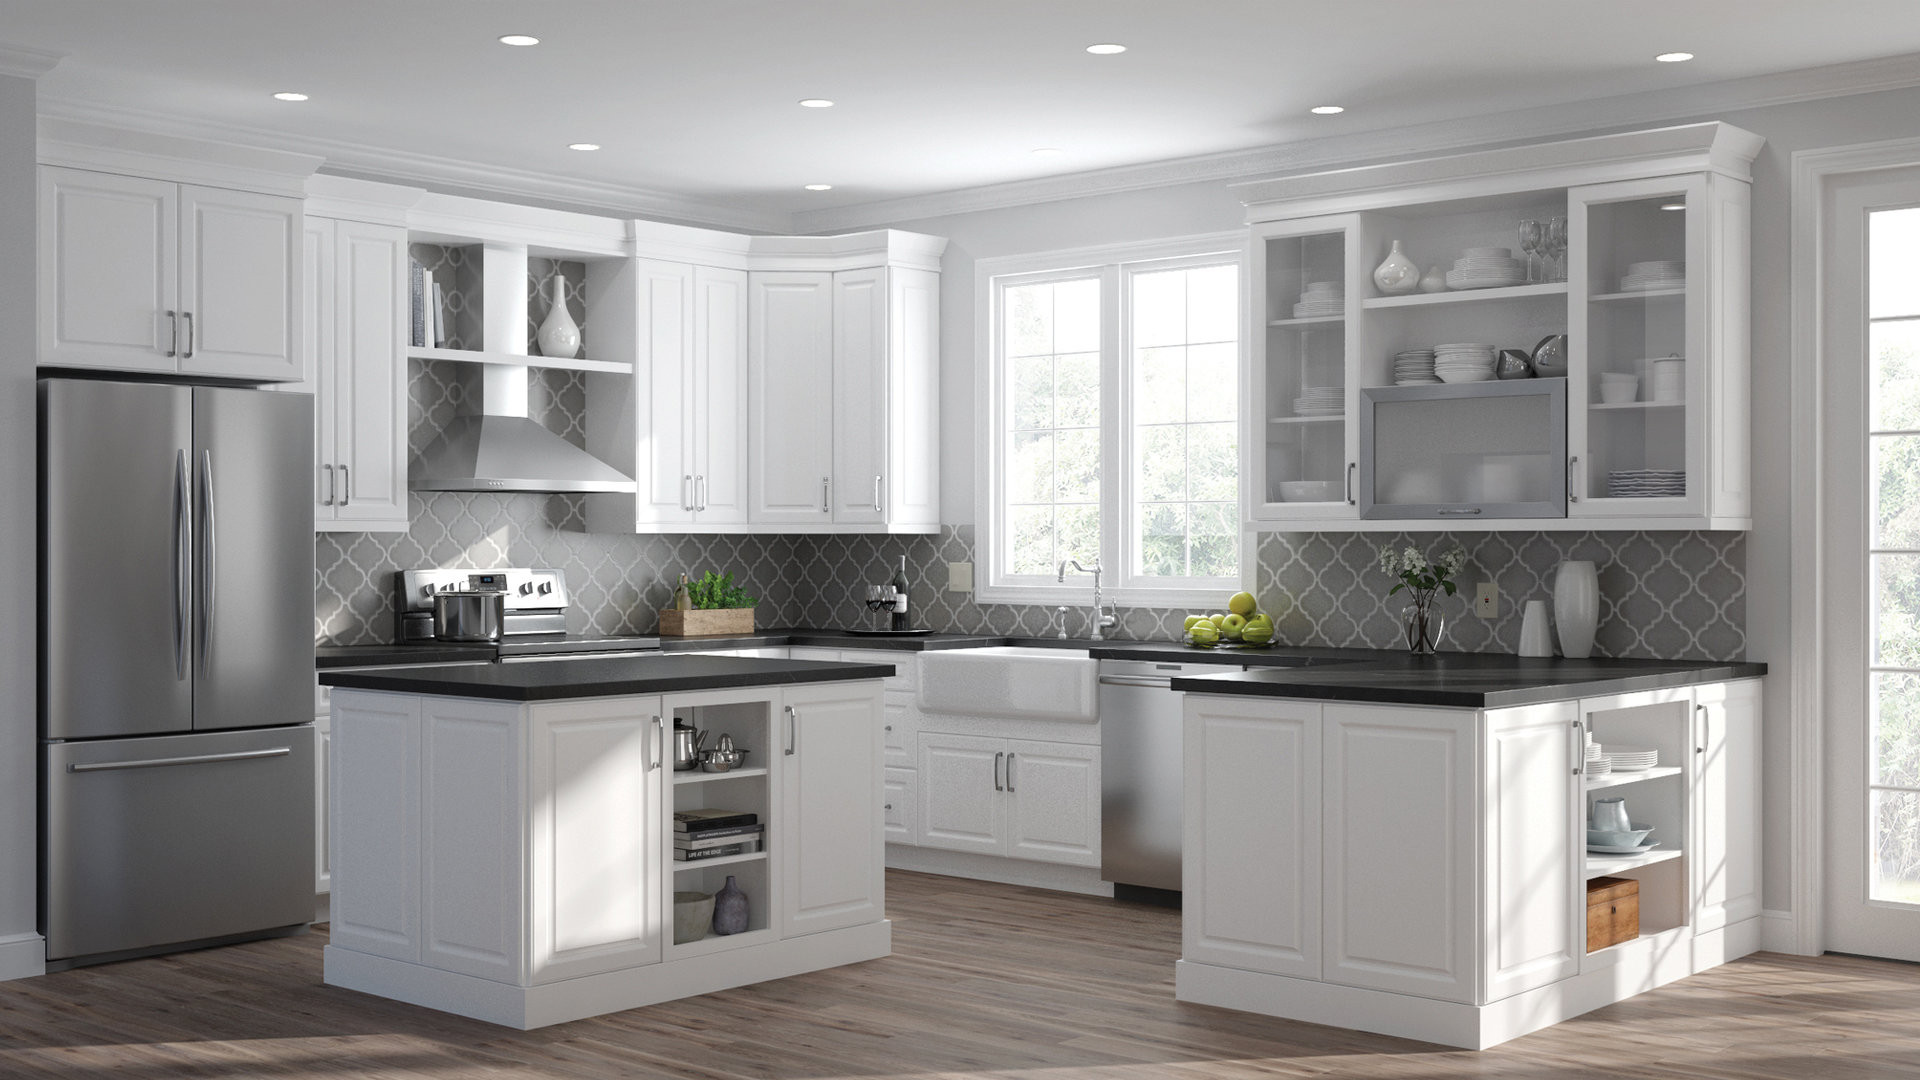 White Kitchen Cabinet Images
 Elgin Double Oven Cabinets in White – Kitchen – The Home Depot